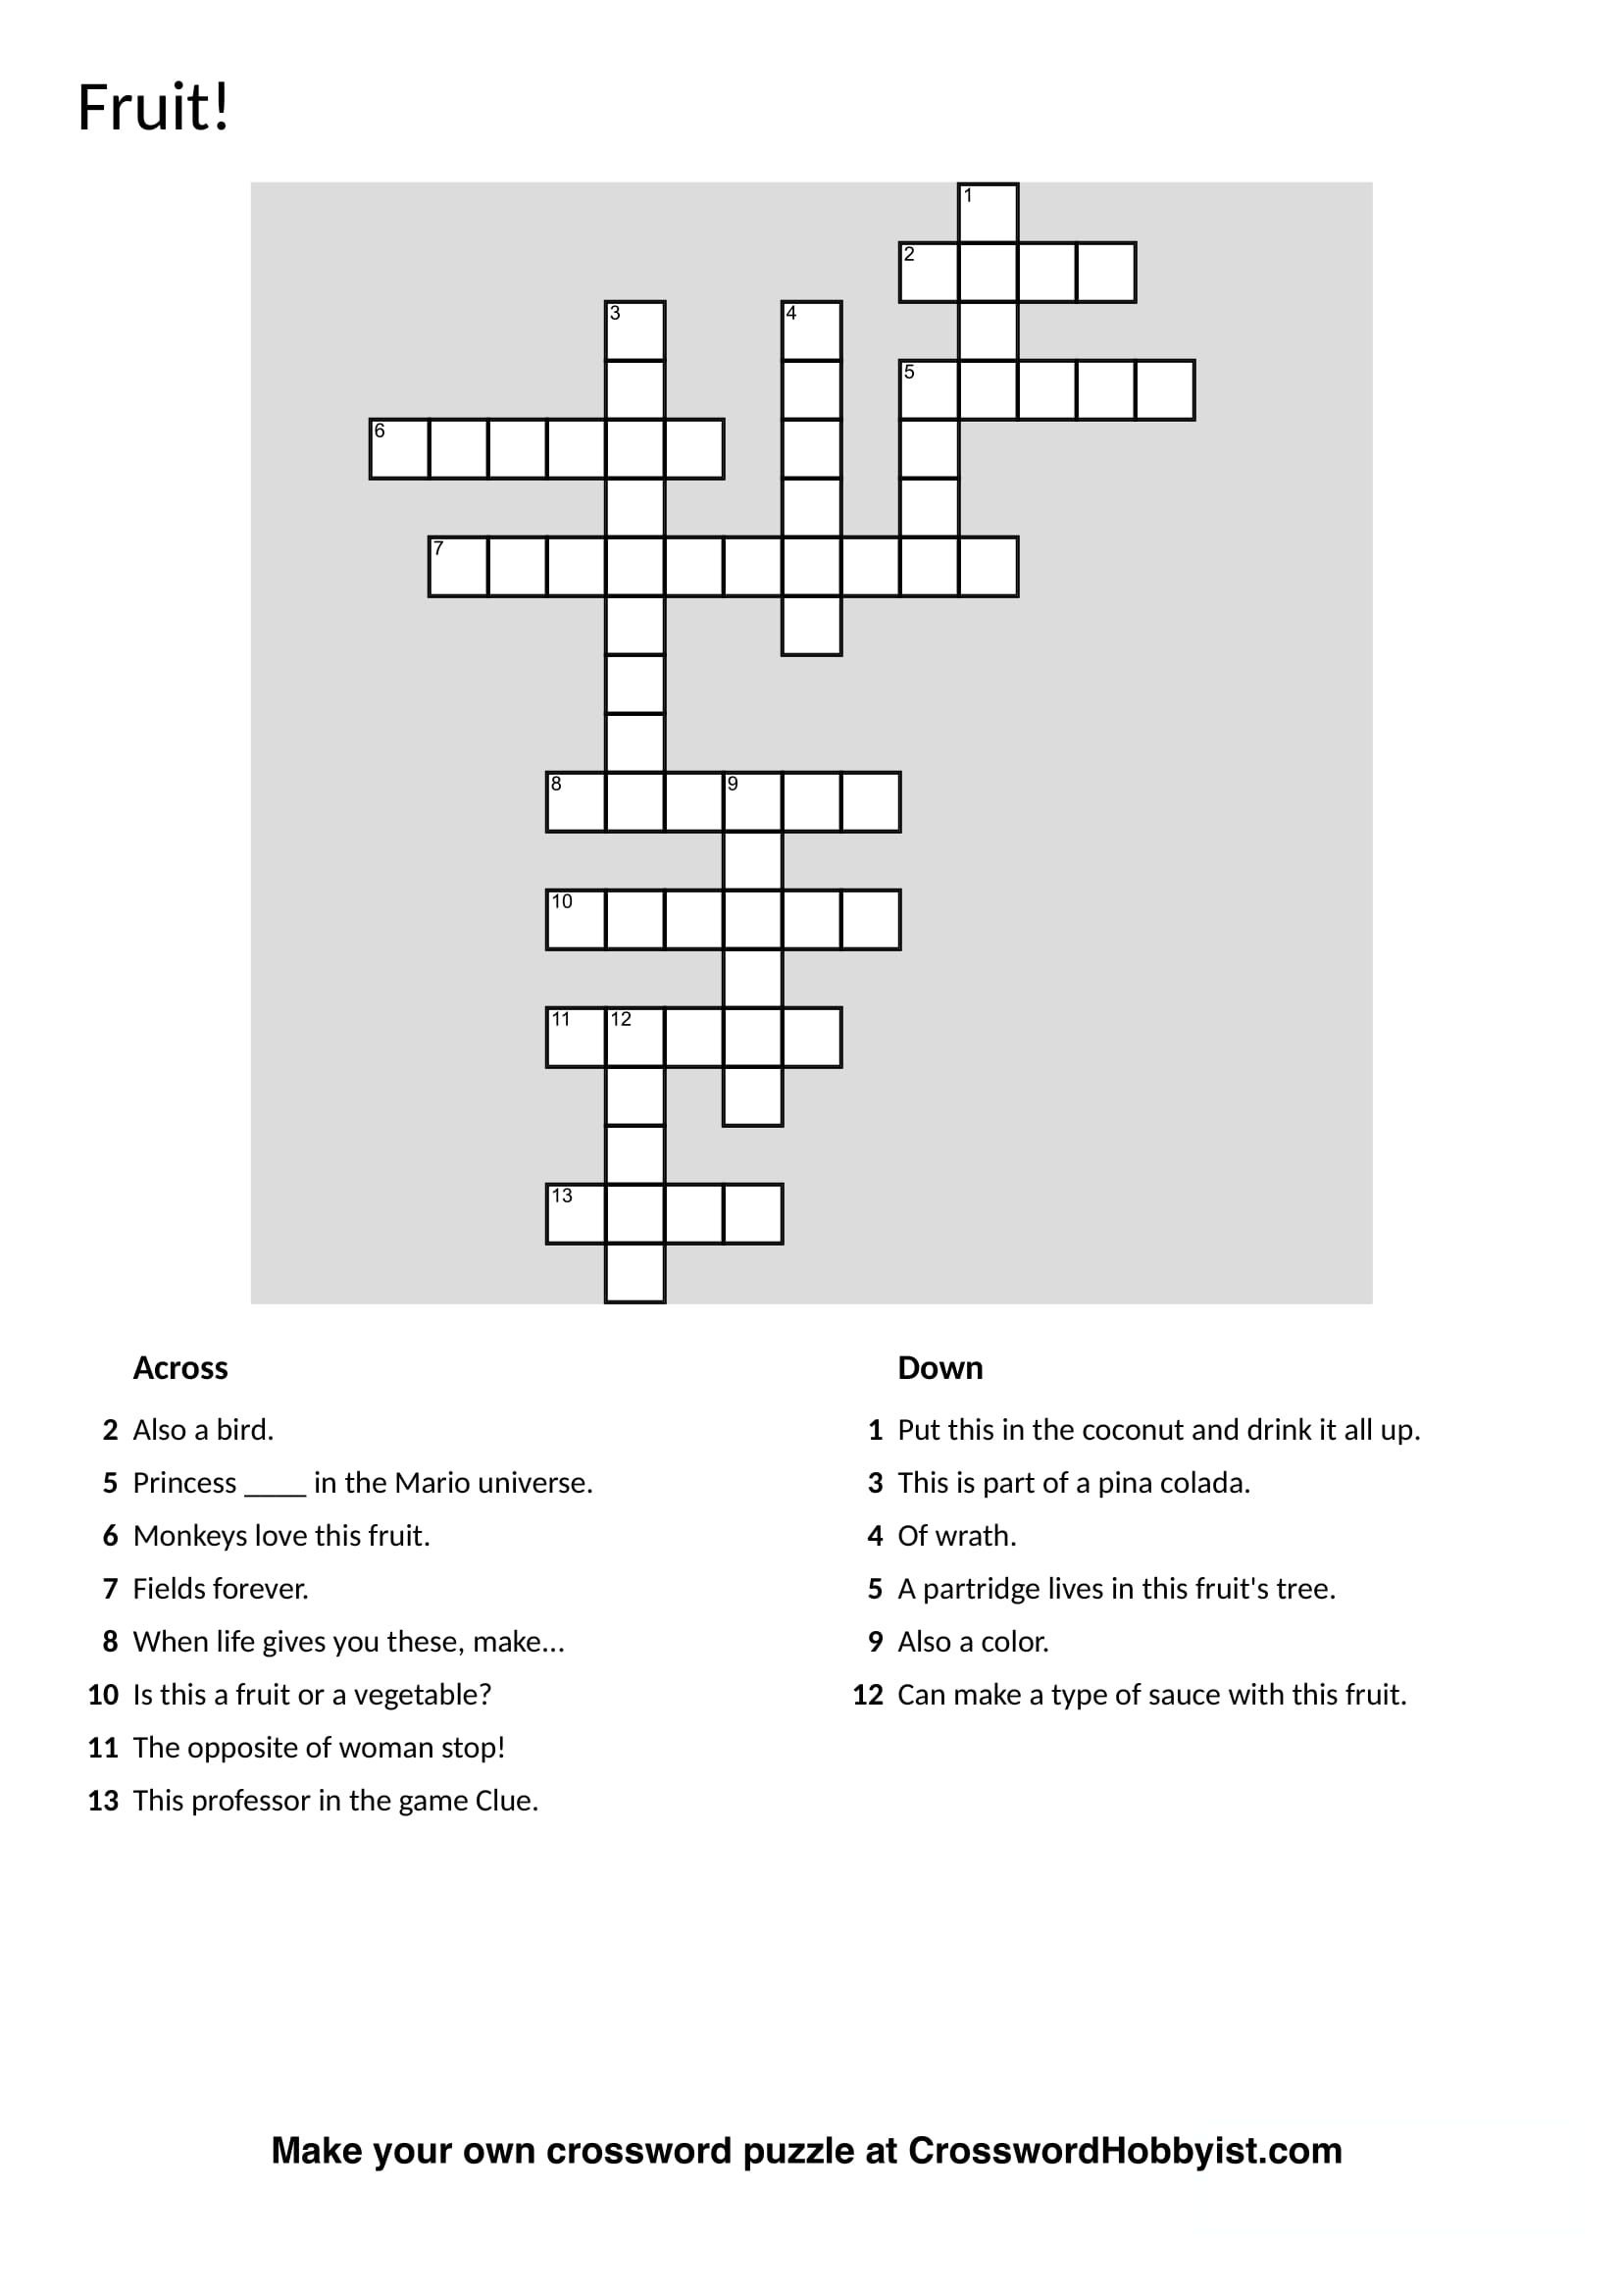 Make Your Own Fun Crossword Puzzles With Crosswordhobbyist - Crossword Puzzle Maker Free Printable With Answer Key